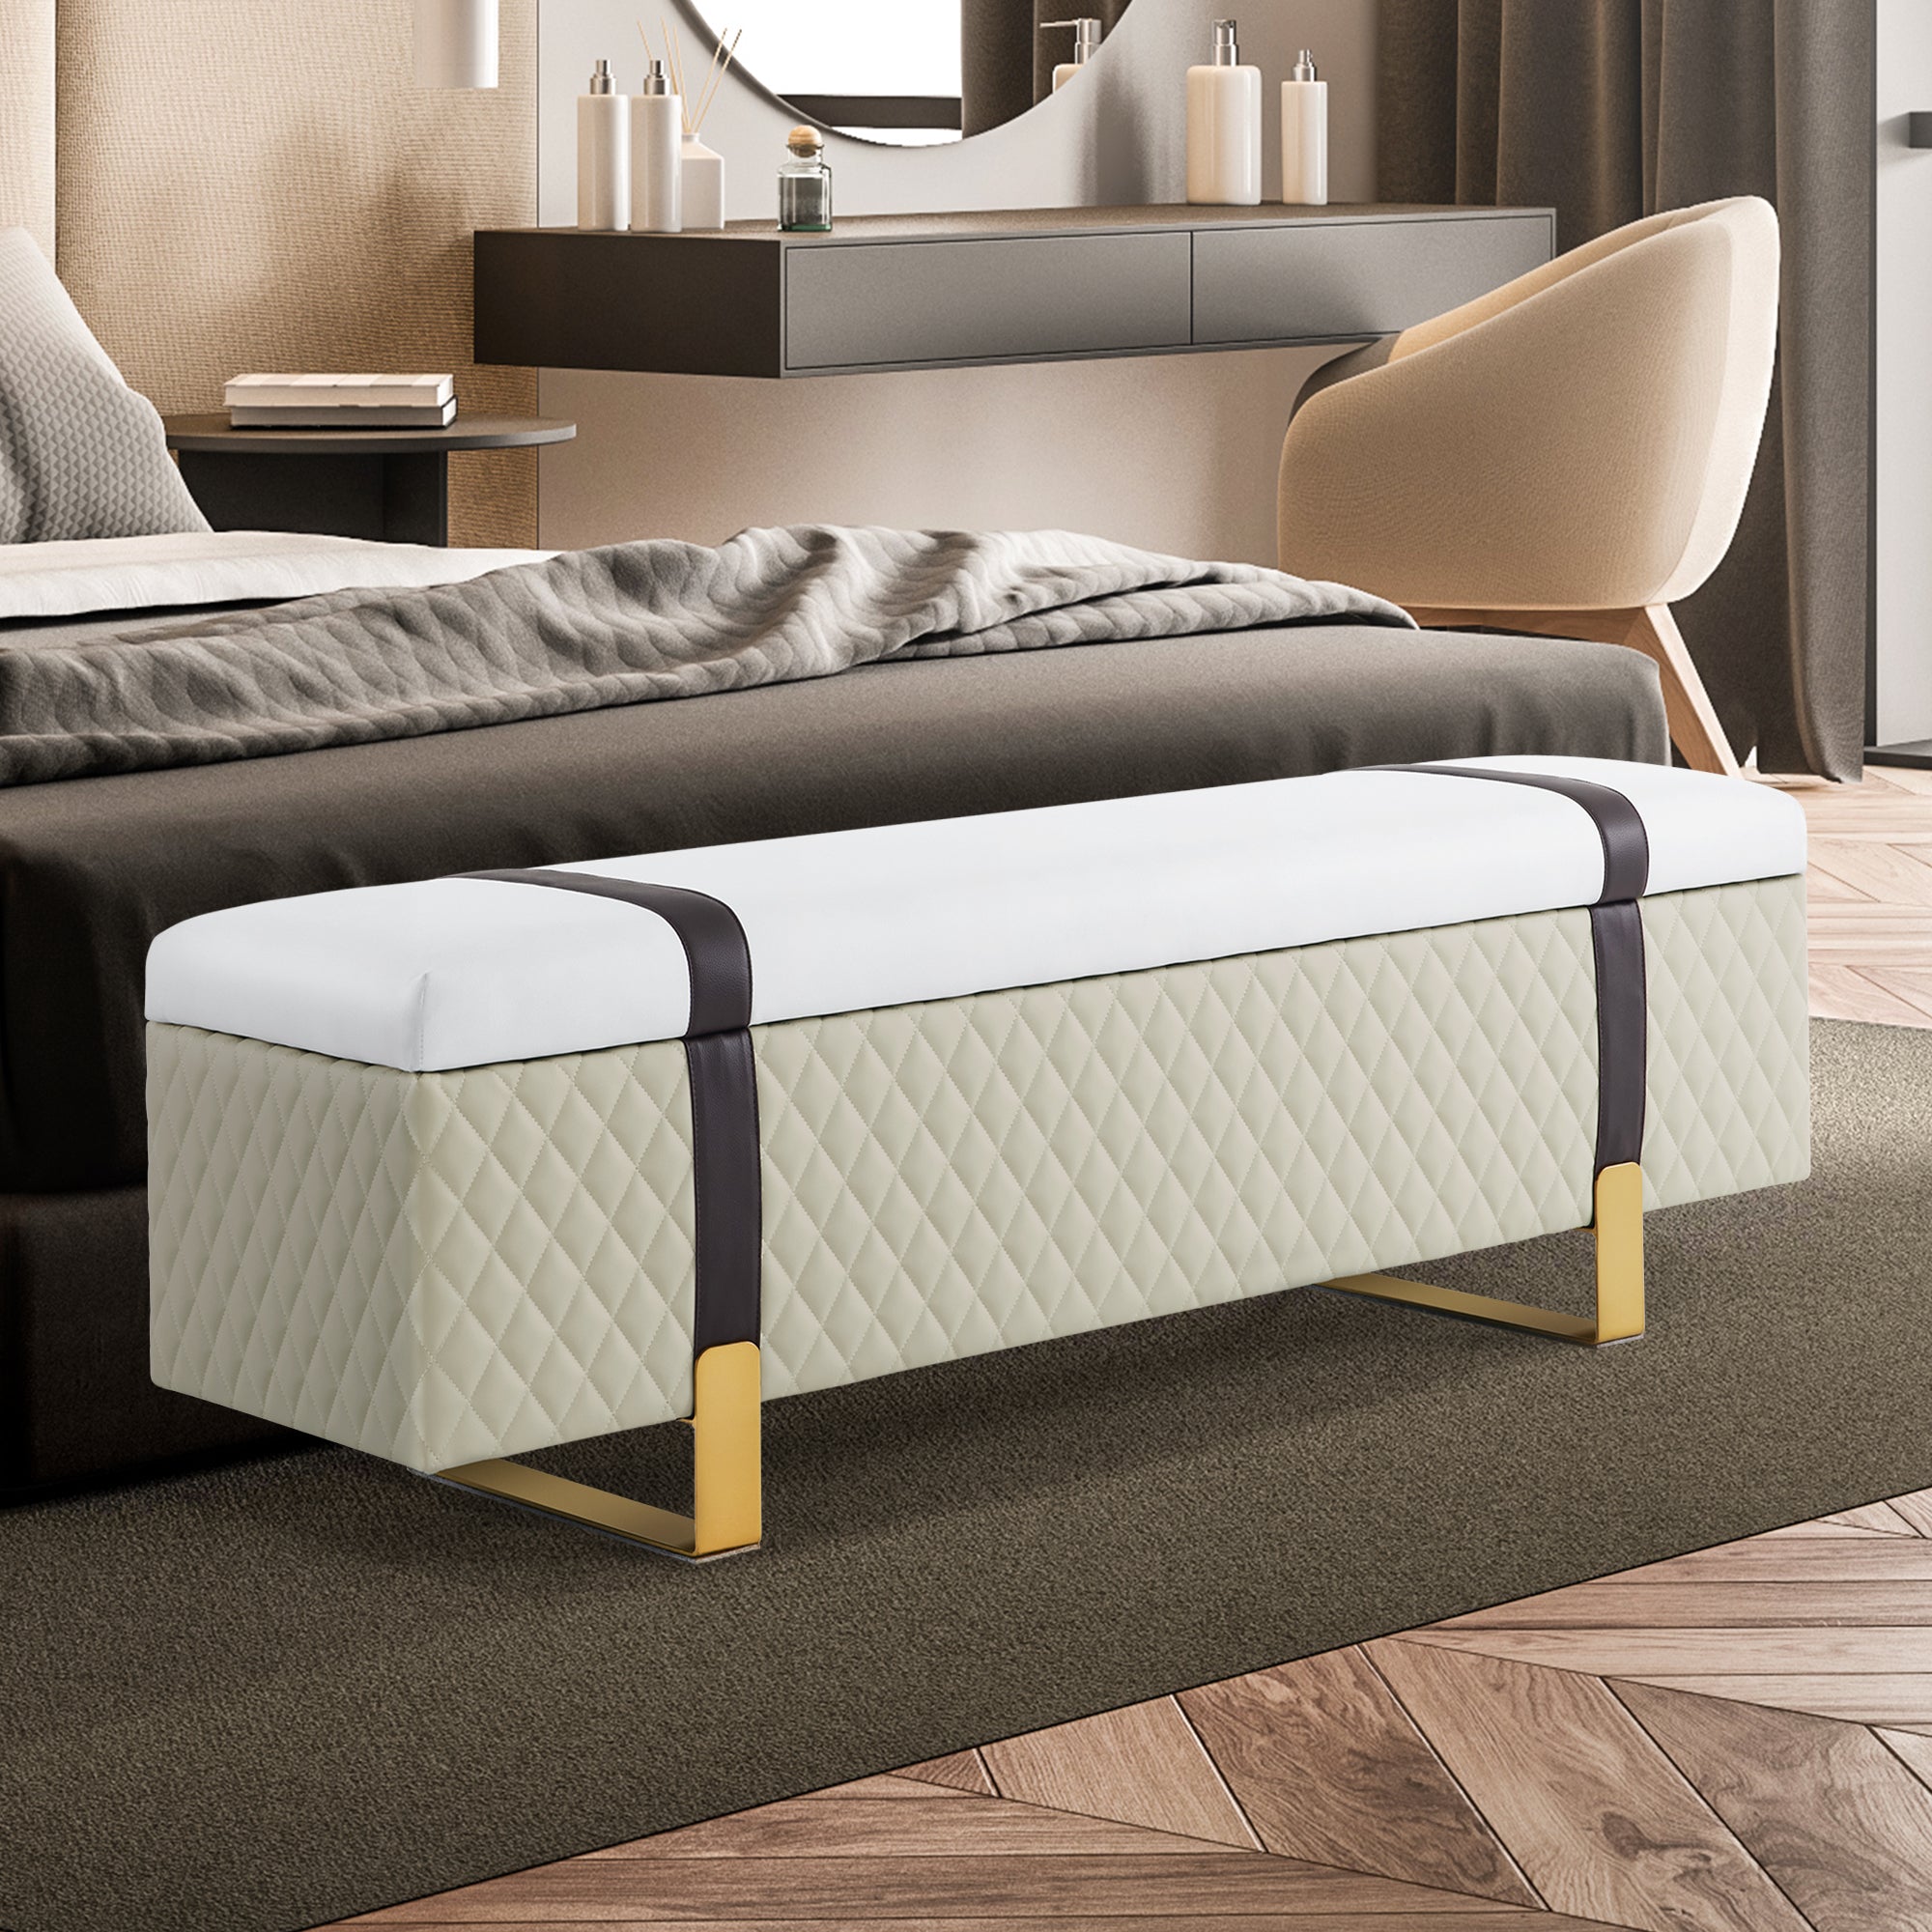 MCombo Modern Storage Ottoman Bench, Faux Leather Upholstered Footstool with Storage Space, Bed End Bench for Bedroom, Living Room, Entryway W463